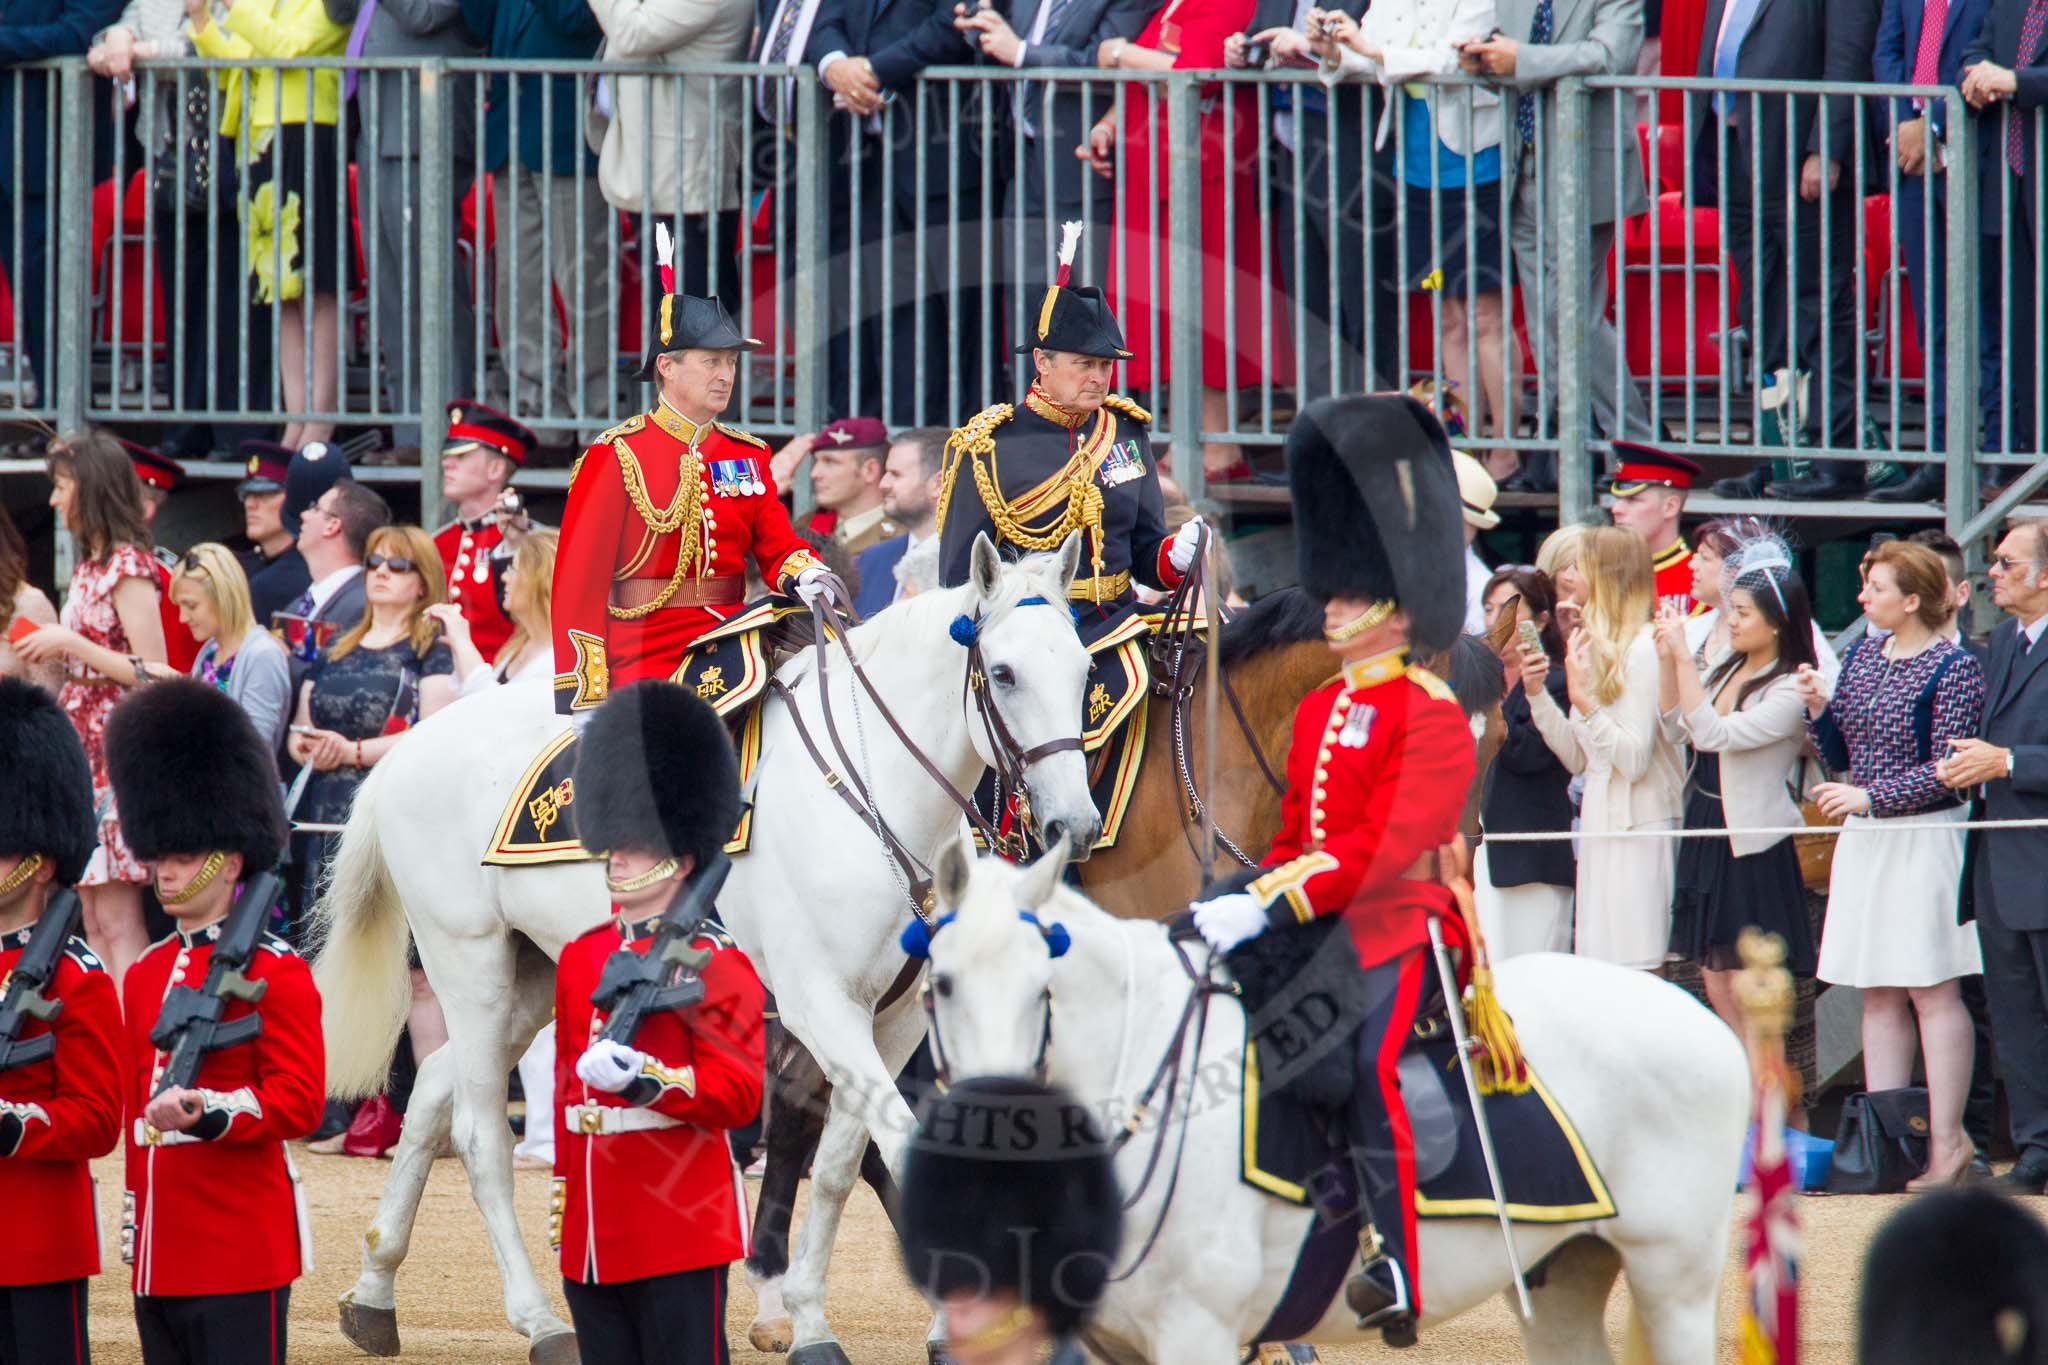 Trooping the Colour 2014.
Horse Guards Parade, Westminster,
London SW1A,

United Kingdom,
on 14 June 2014 at 10:58, image #346